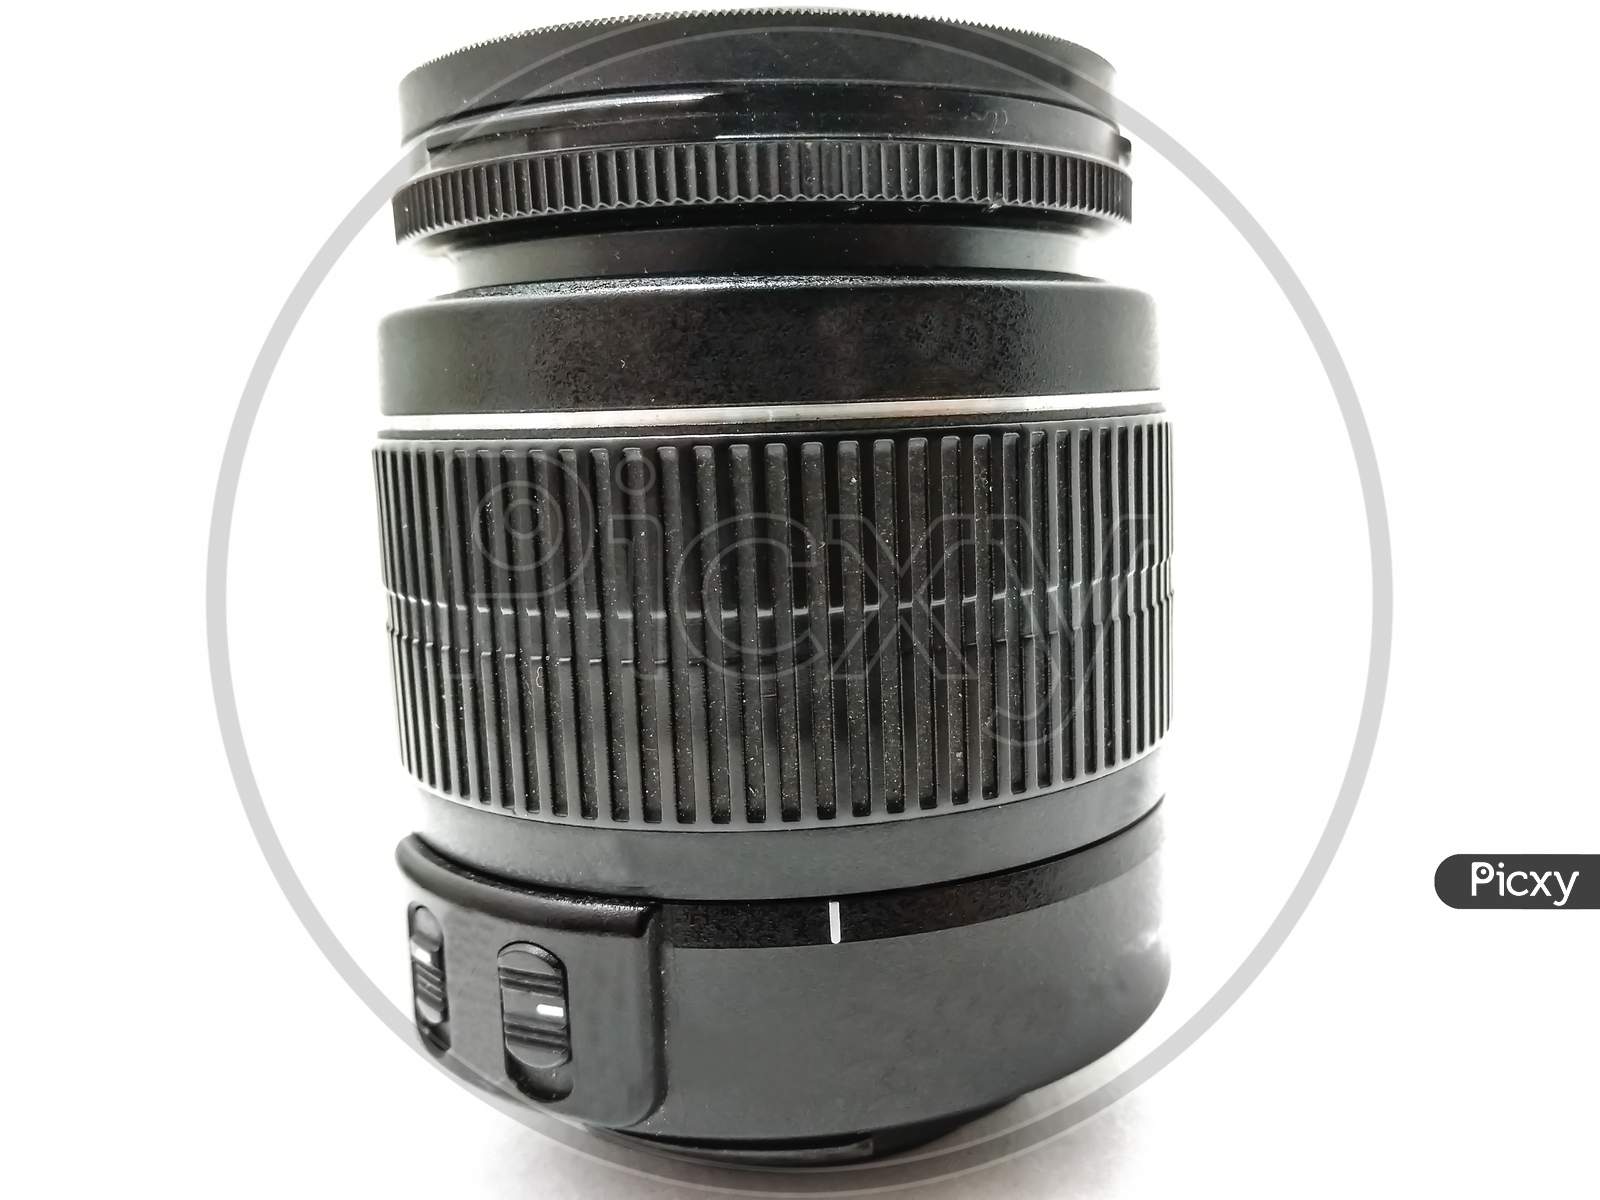 A picture of dslr lens on white background